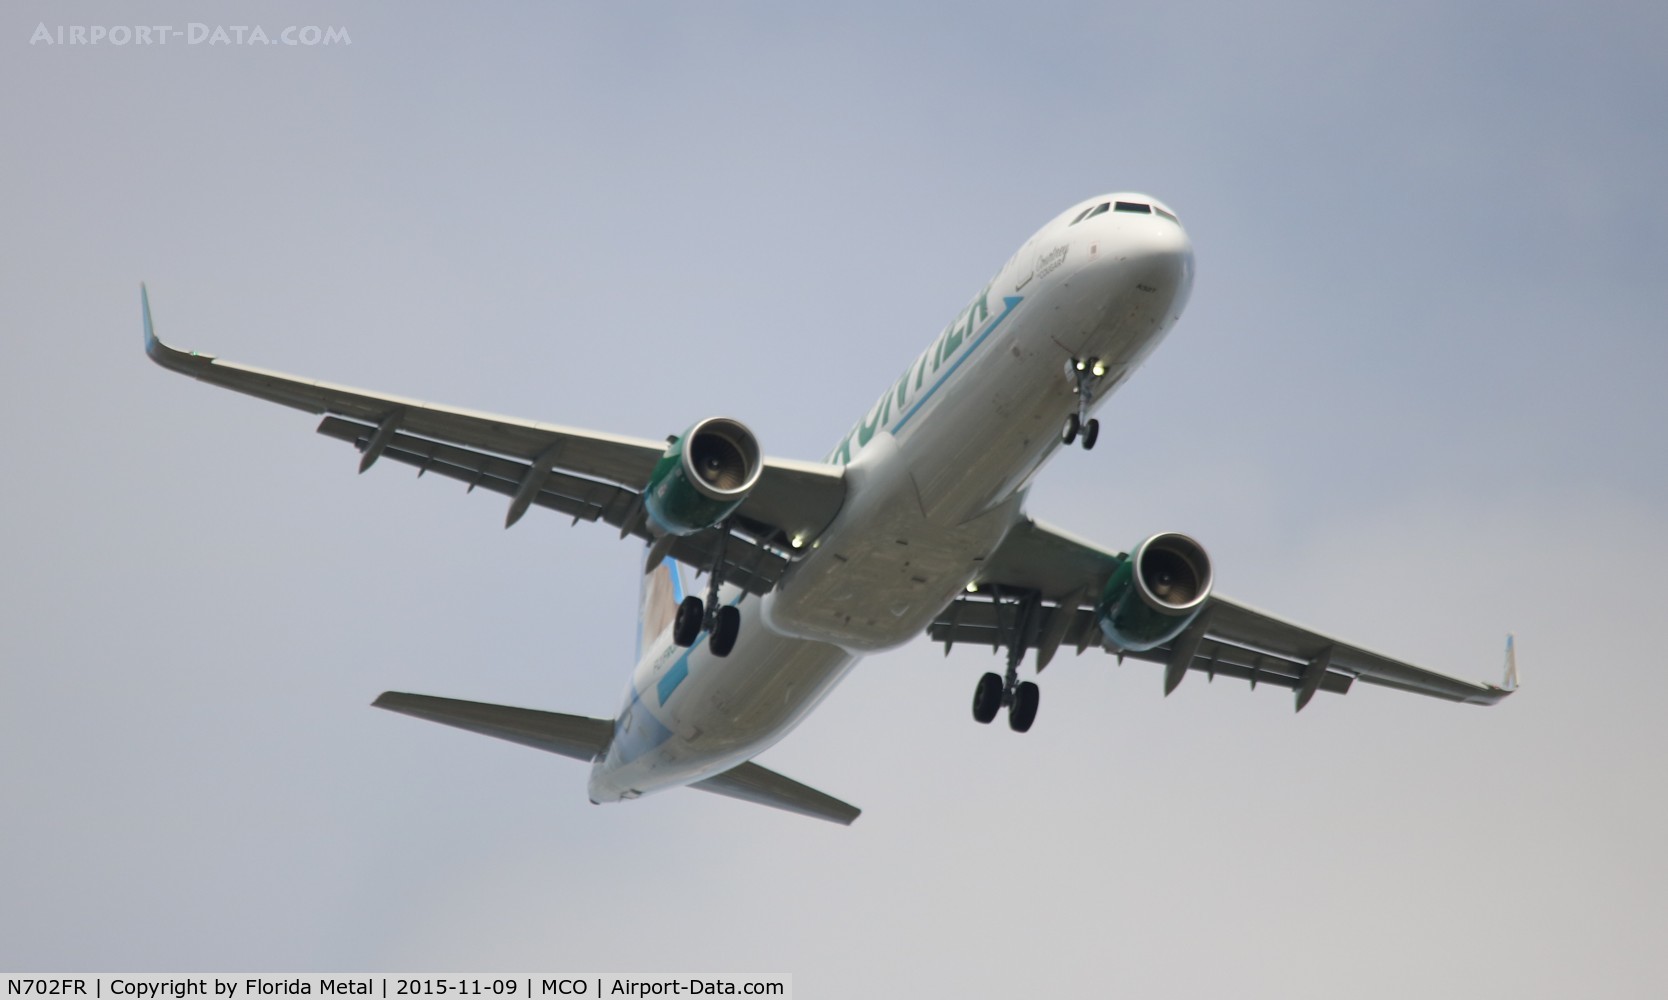 N702FR, 2015 Airbus A321-211 C/N 6825, Frontier Courtney the Cougar